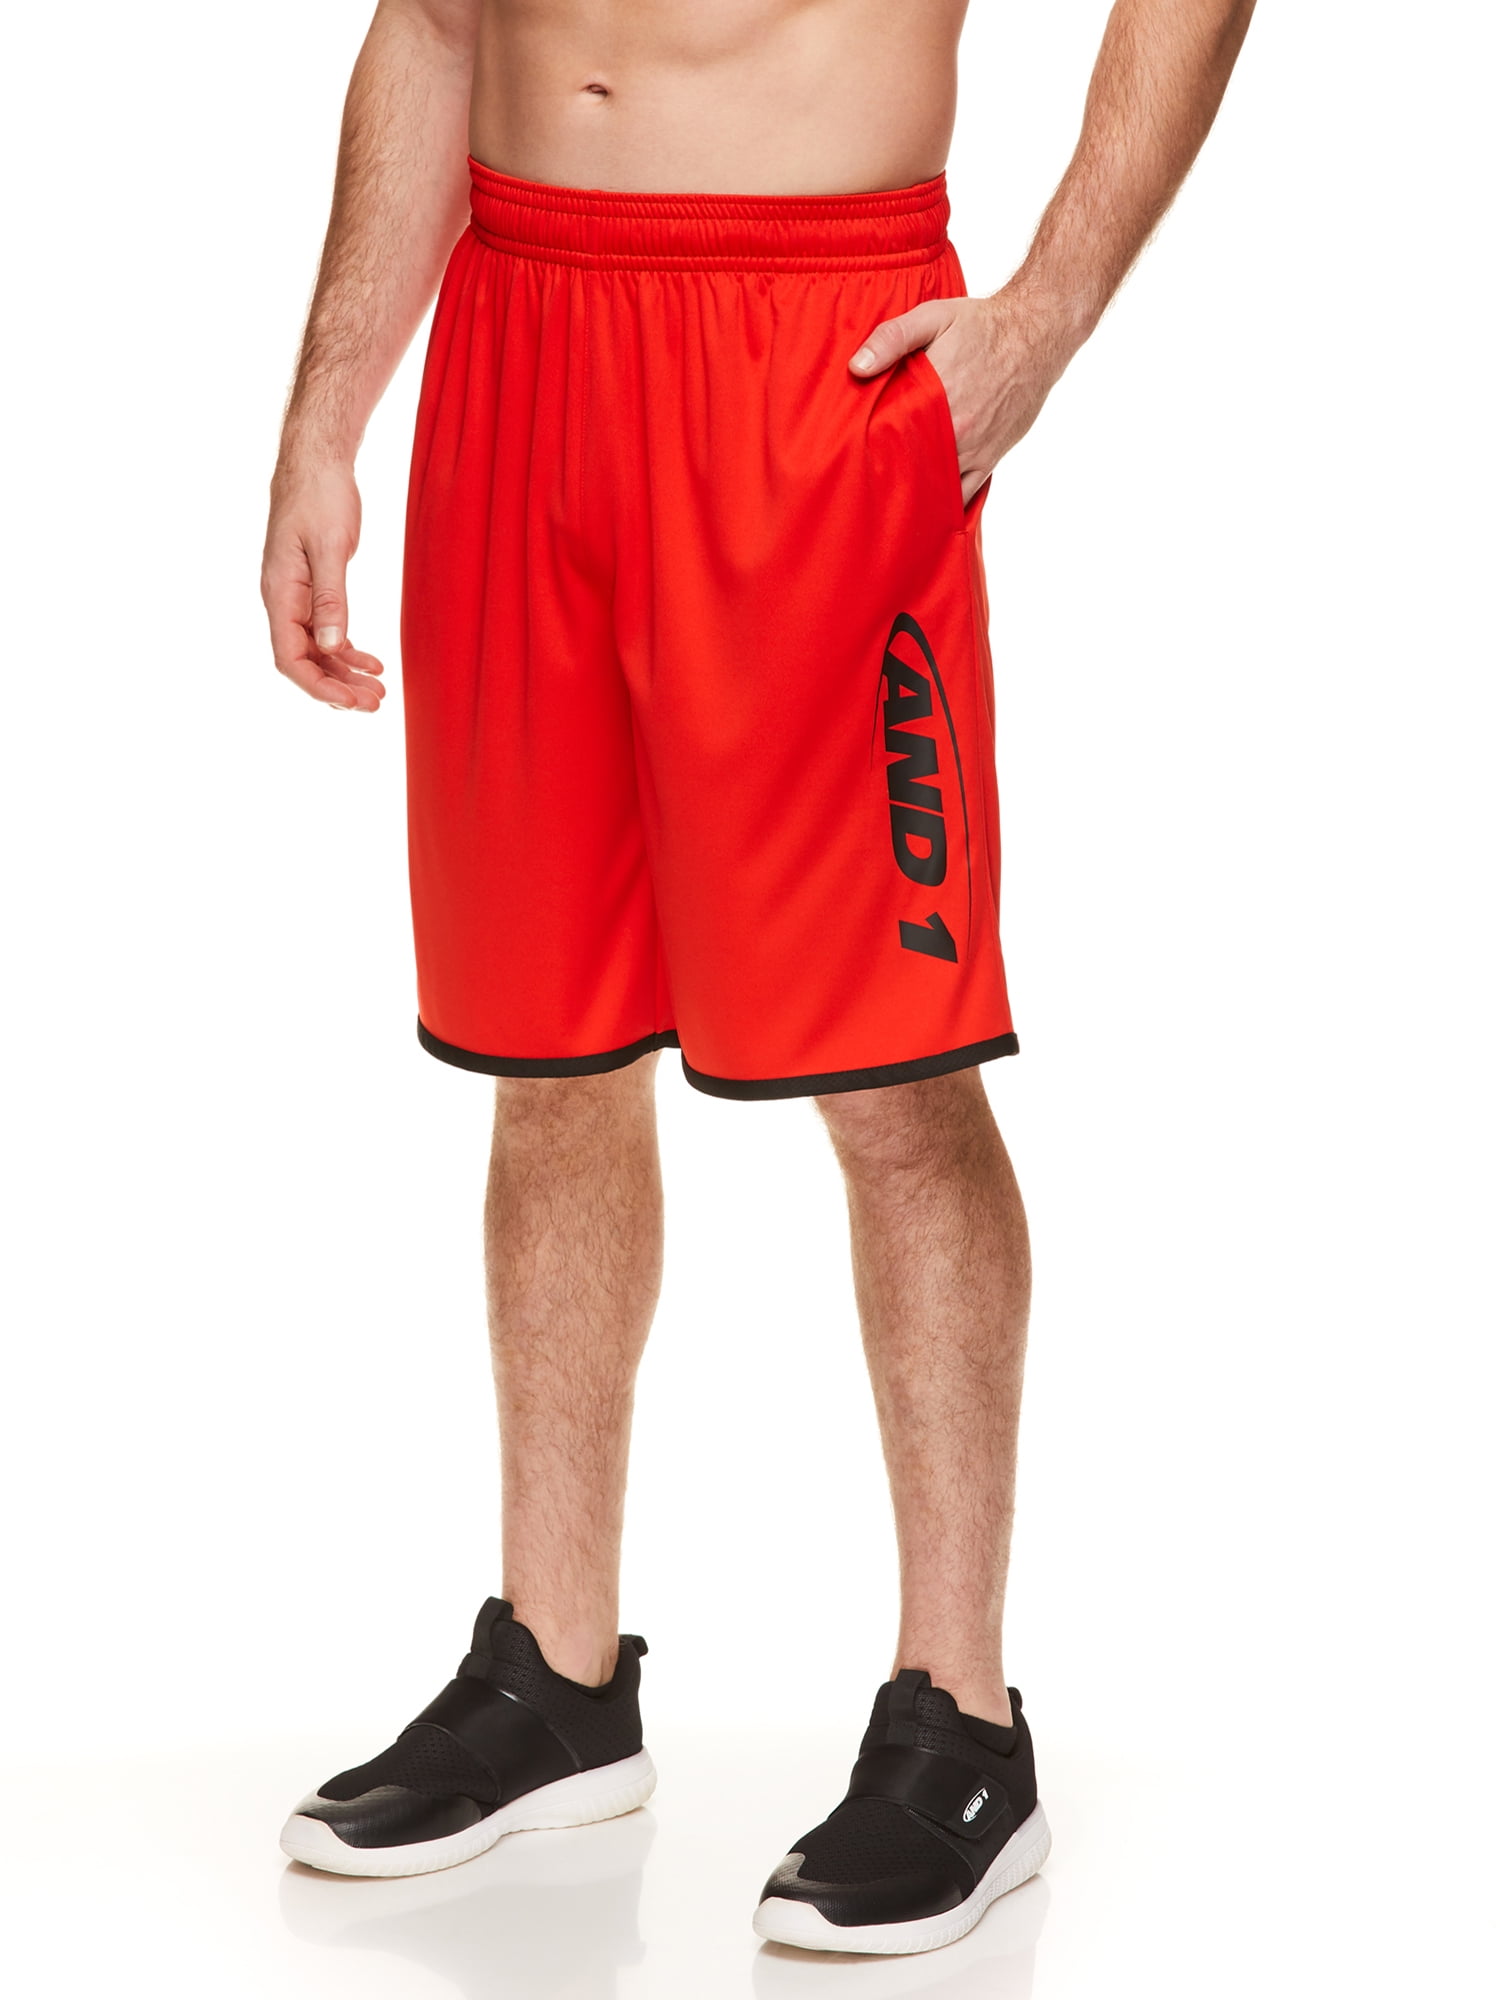 New Mens Basketball Shorts by And1.**Adjustable Elastic Waist Size M.****